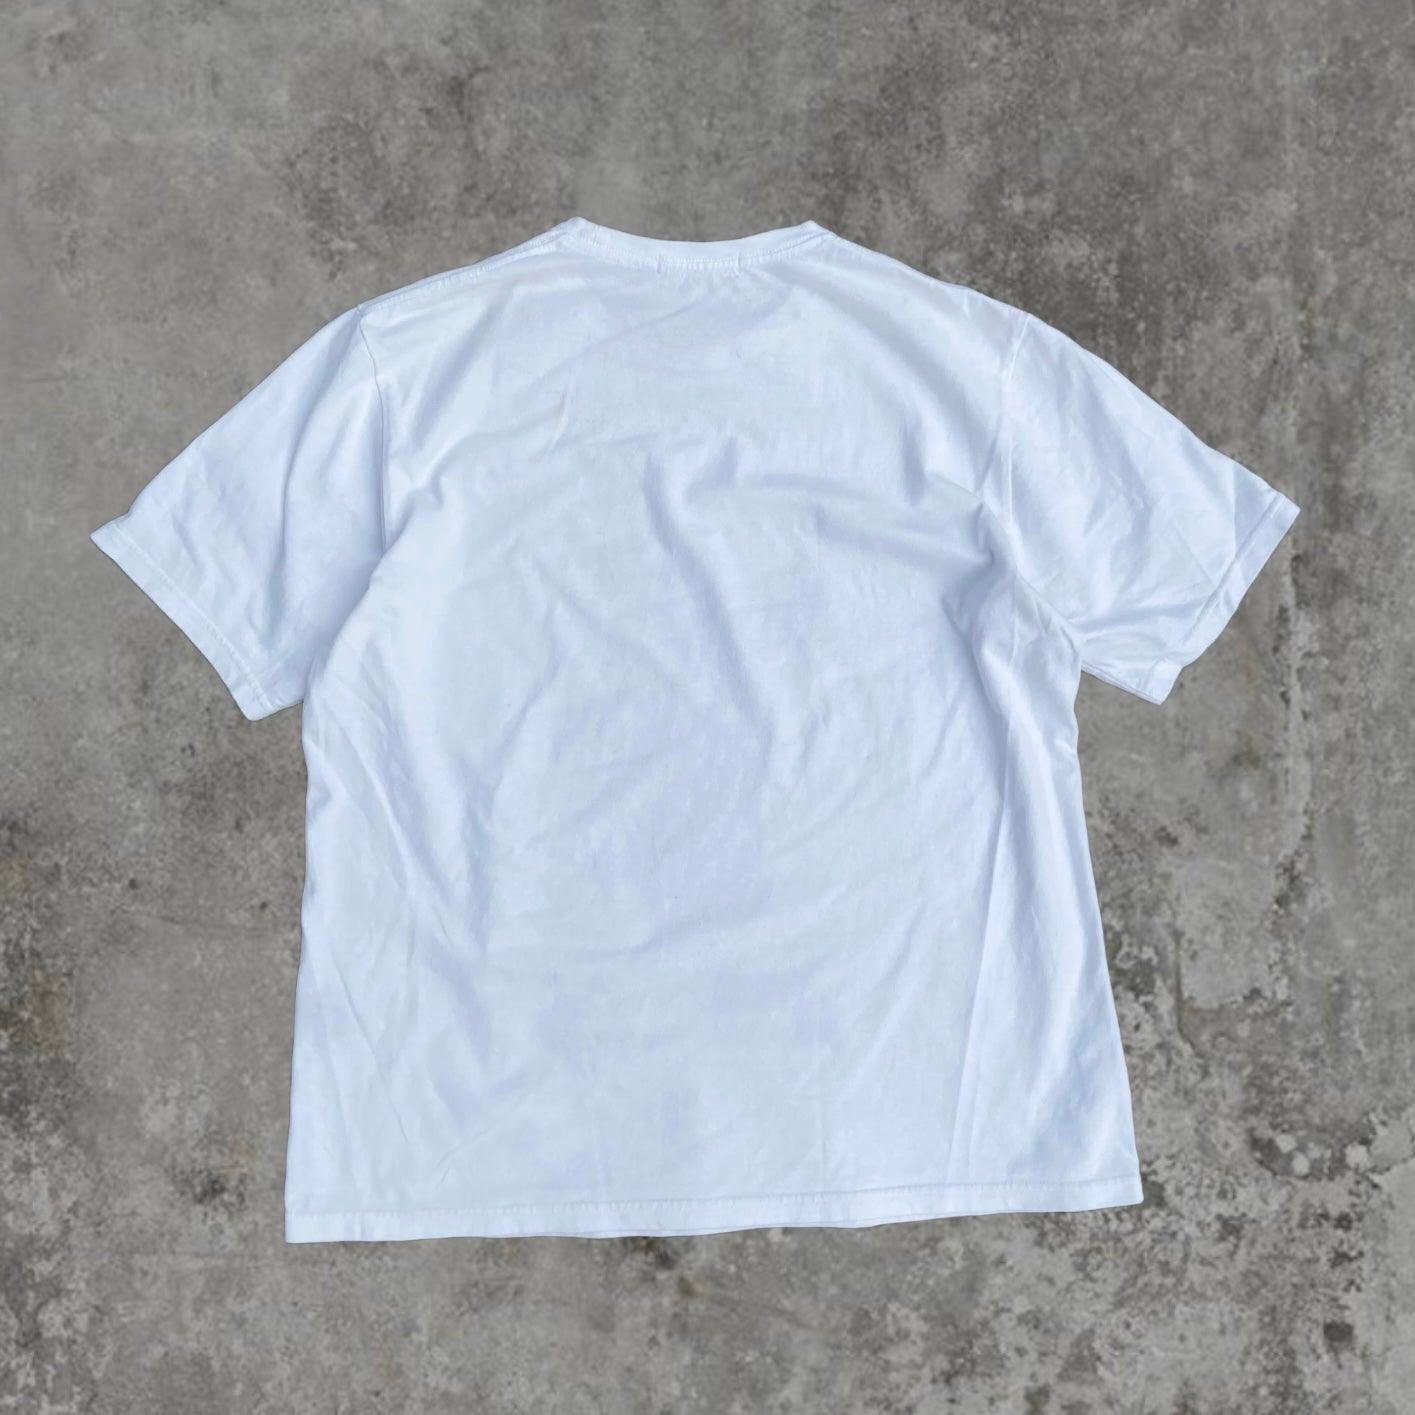 UNDERCOVER 'ORDER DISORDER' TEE - L - Known Source